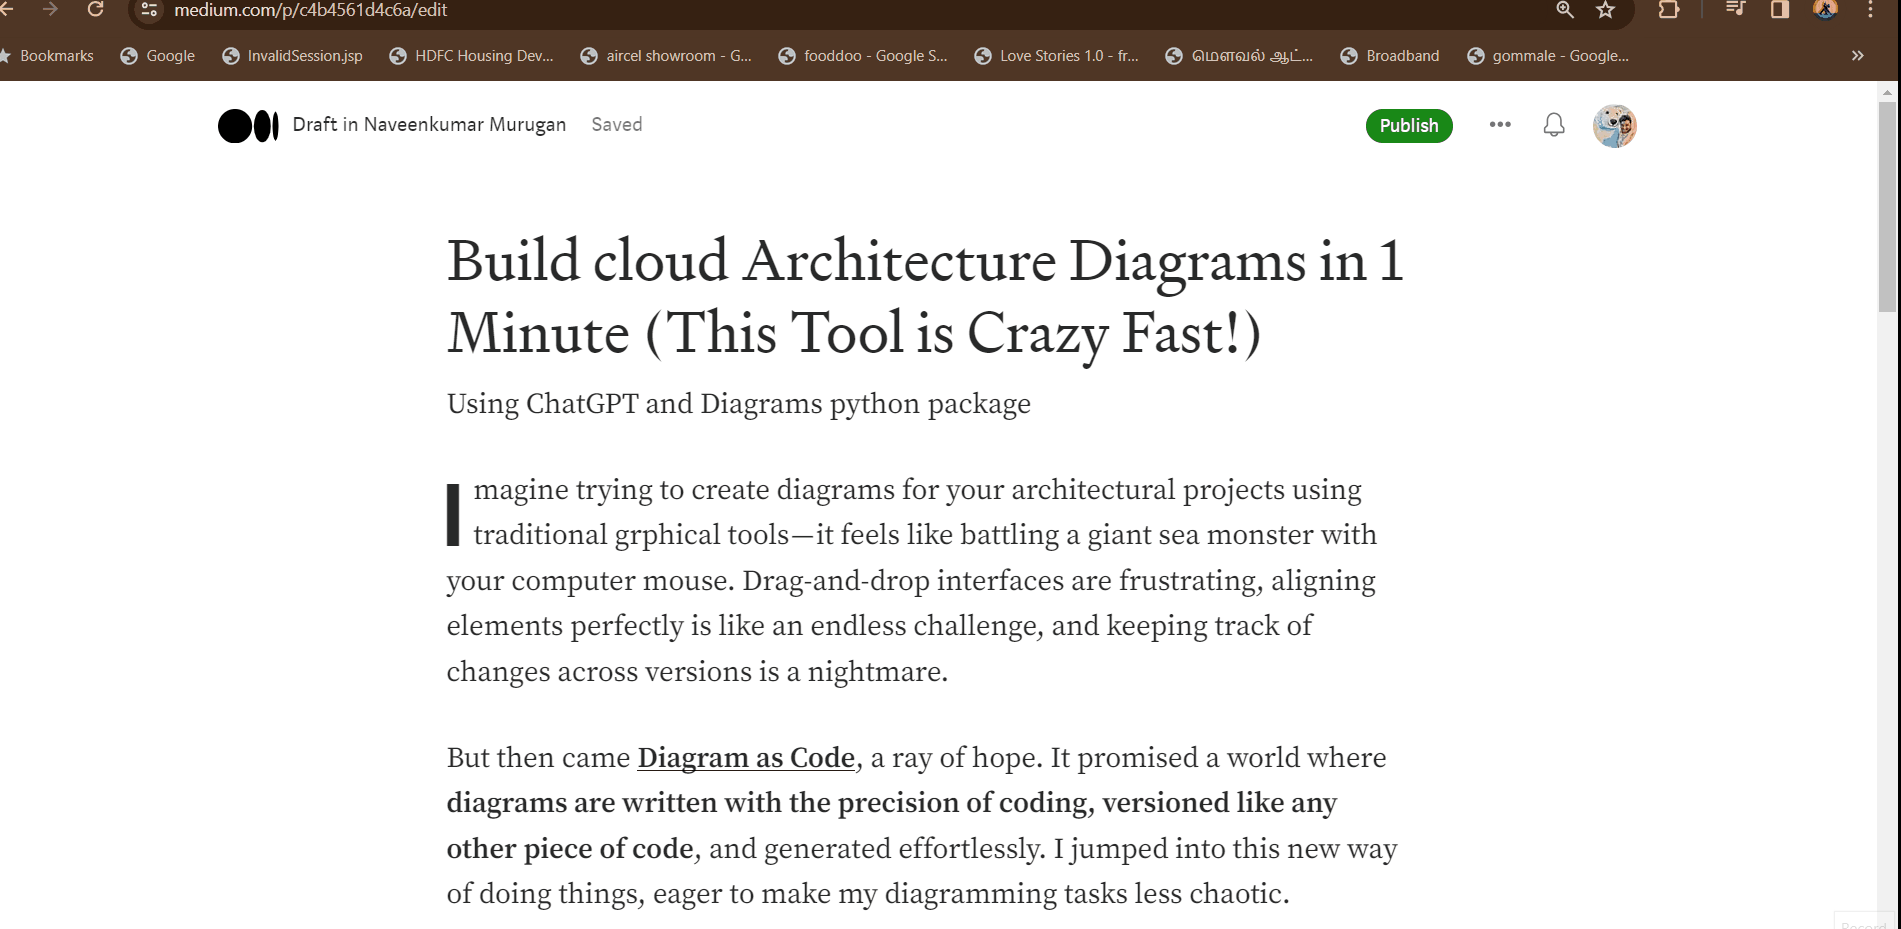 Build cloud Architecture Diagrams in 1 Minute (This Tool is Crazy Fast!)